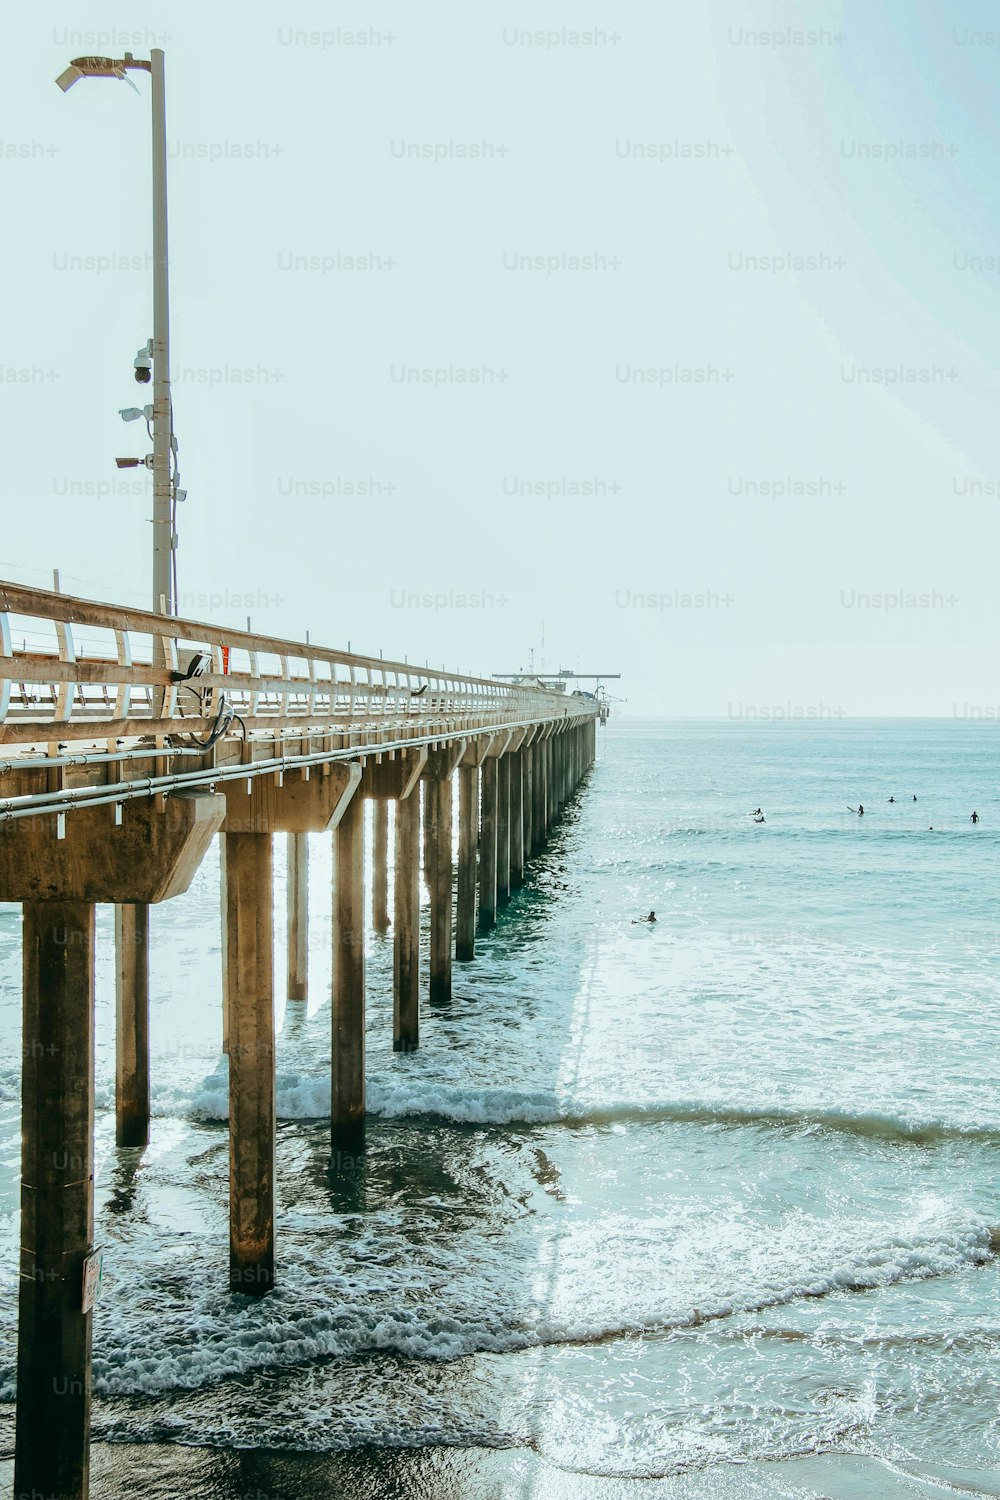 A vertical shot of the La Jolla pier on the ocean with a cloudless sky background in San Diego